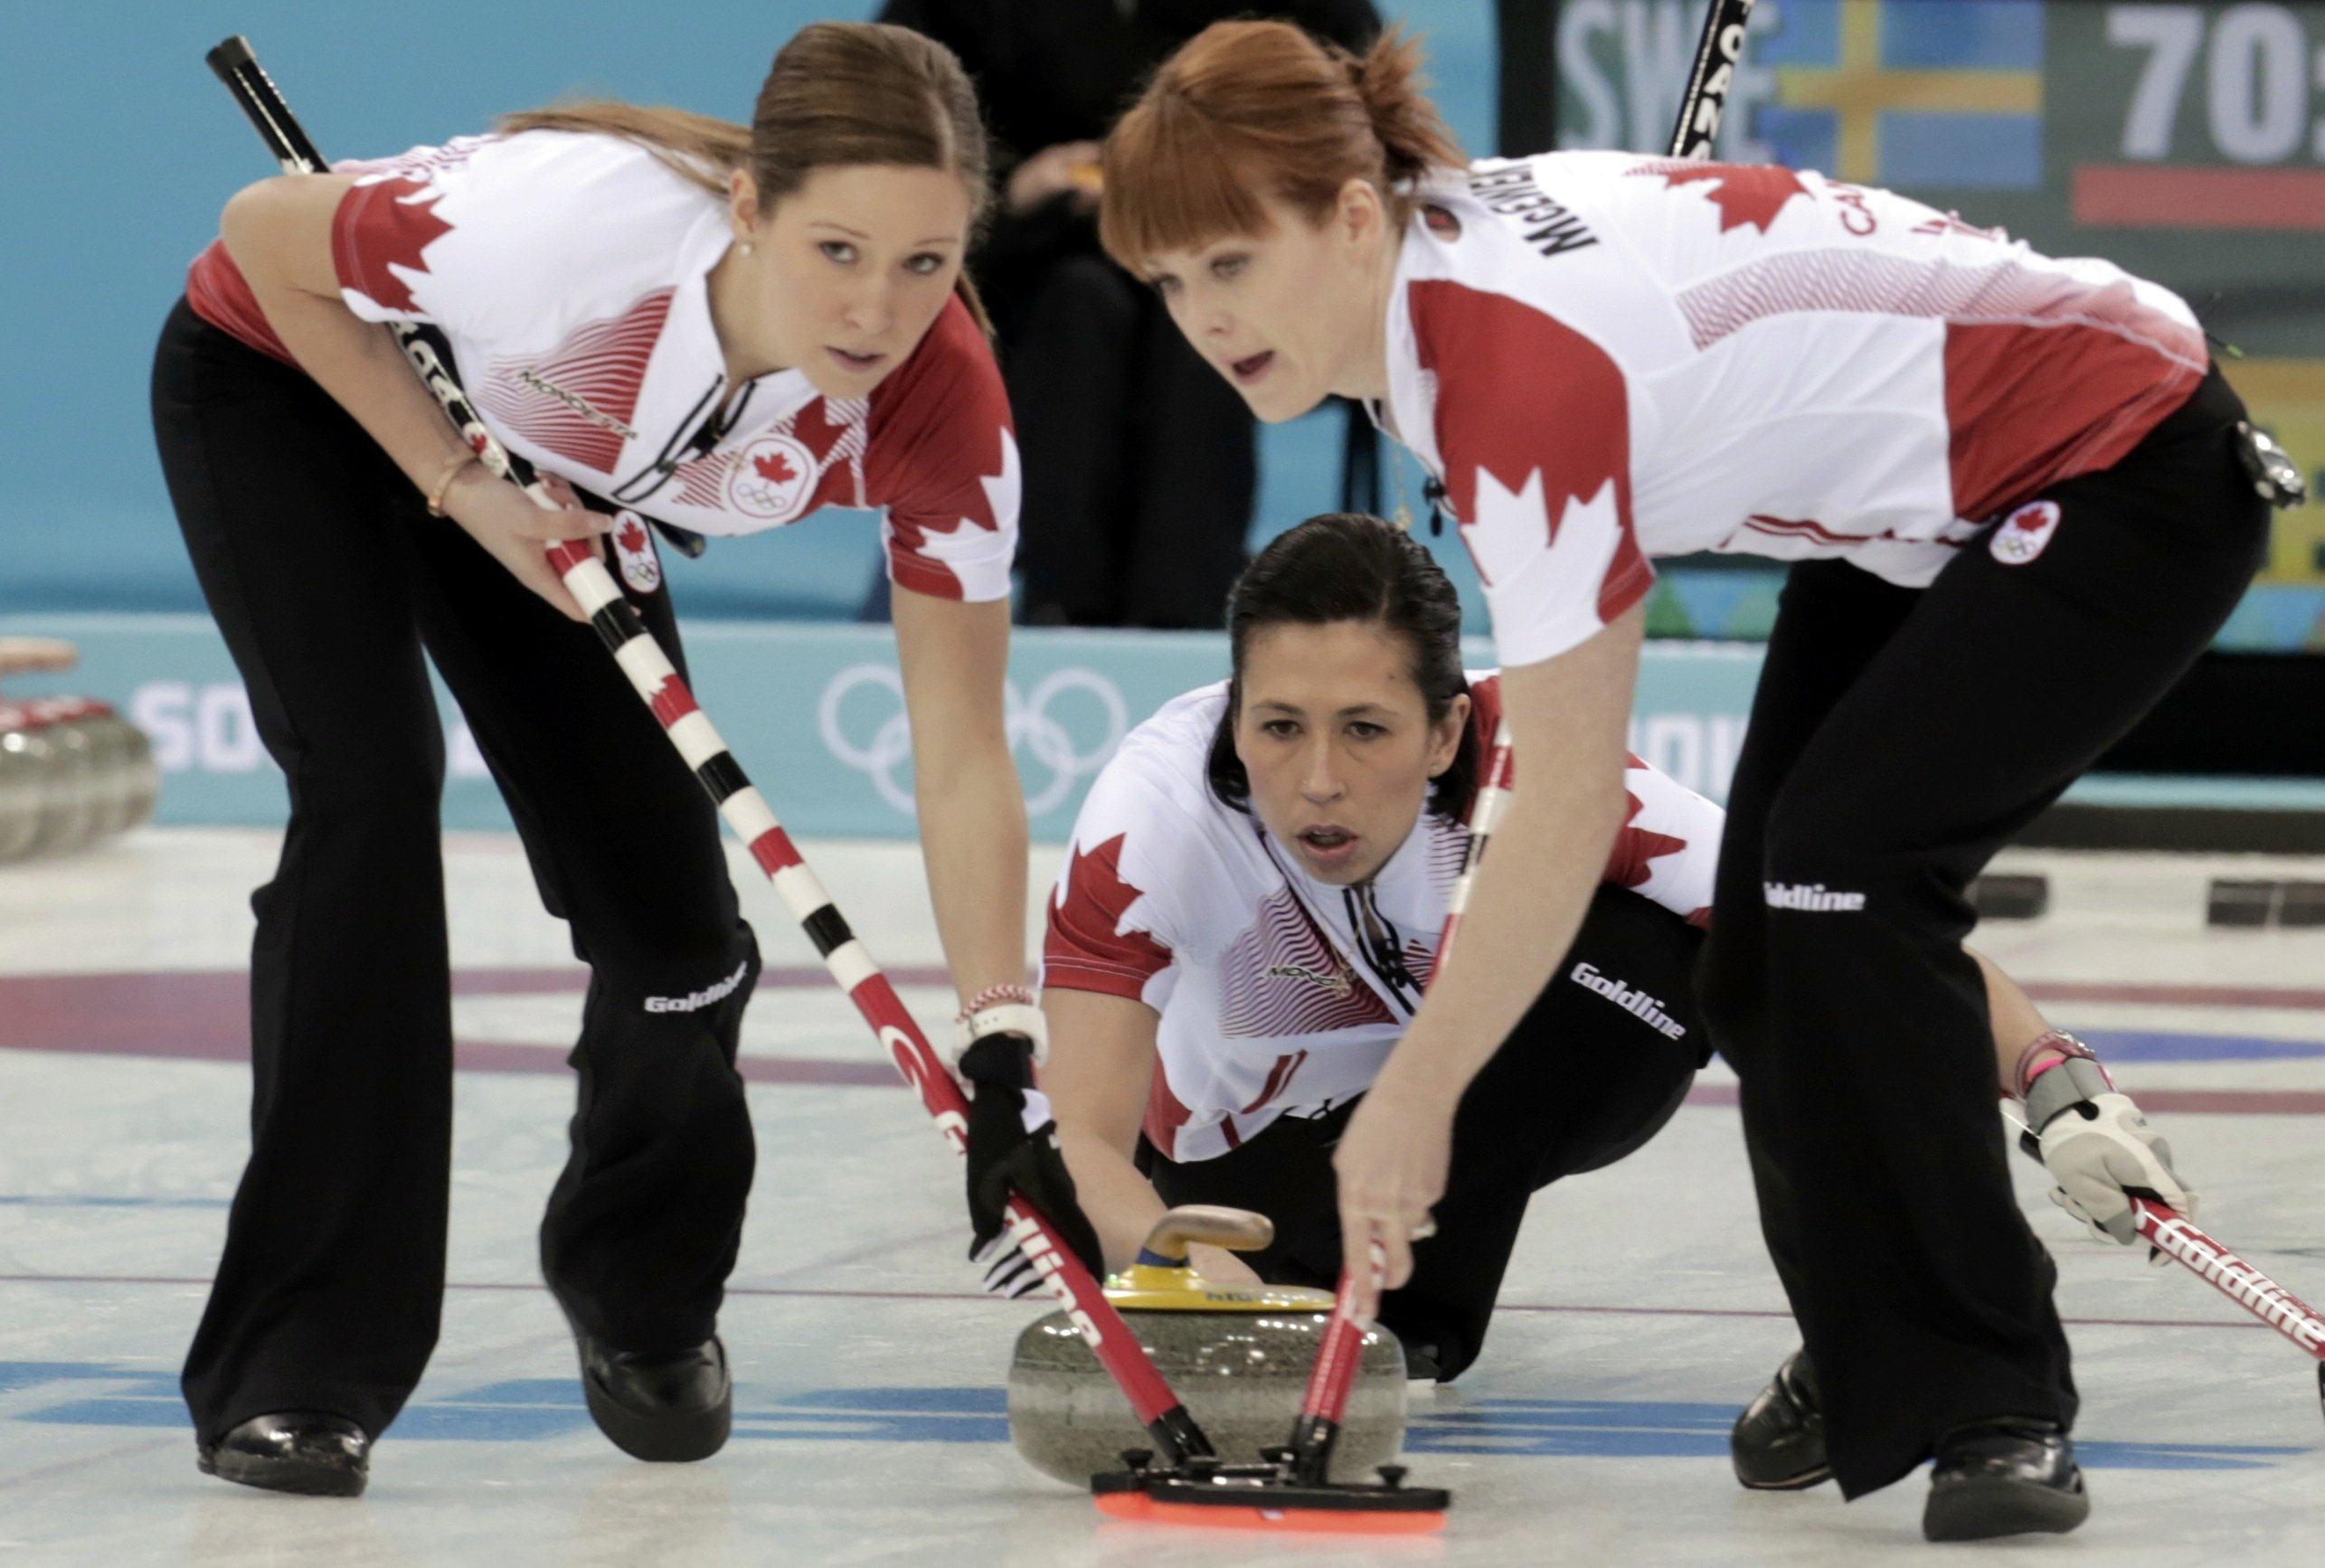 Owners of the gold medal in curling Canadian women's team in Sochi